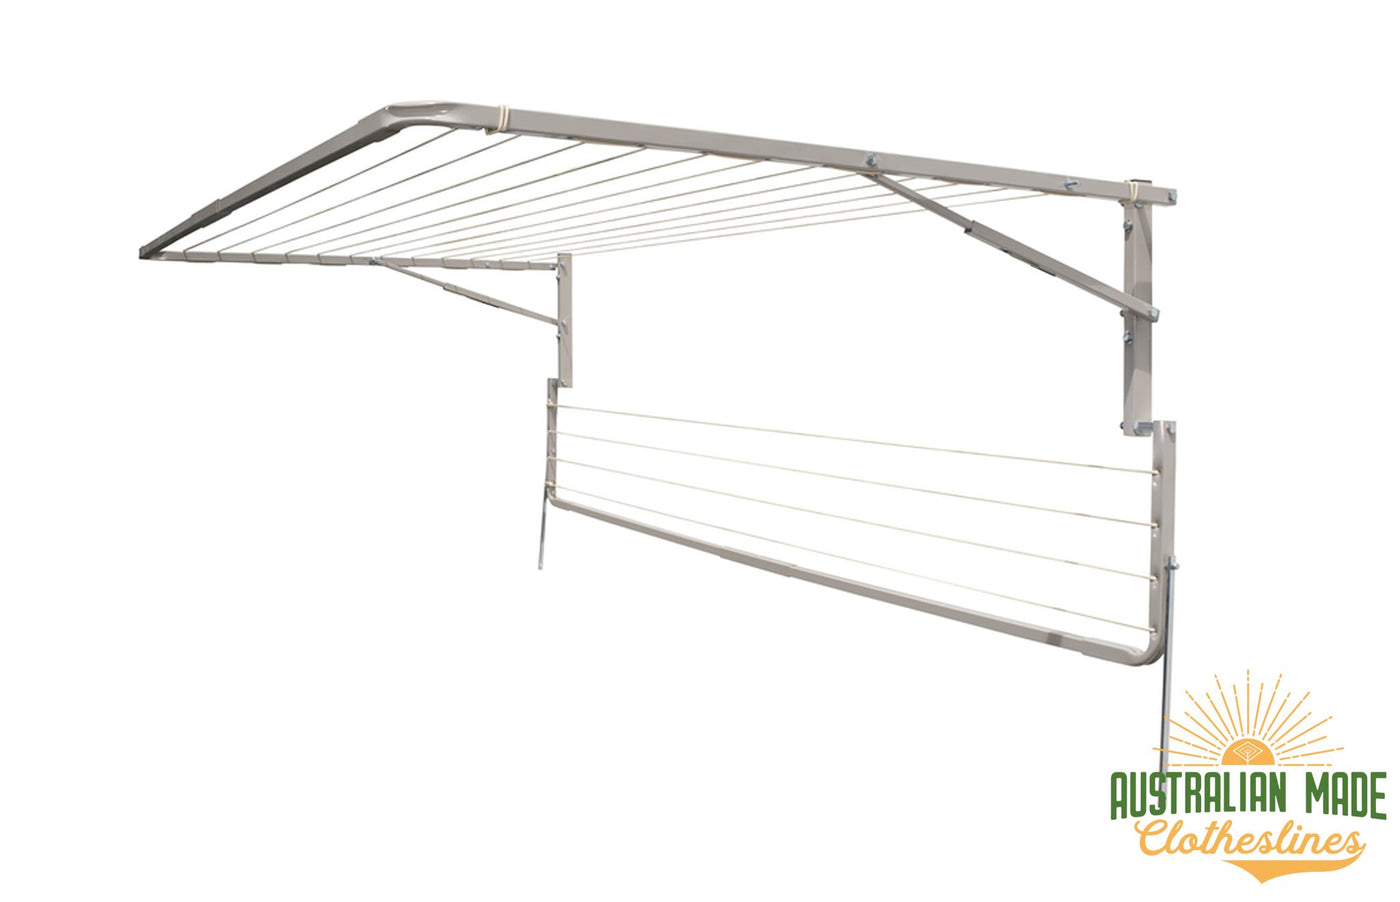 Eco 240 Clothesline - Right Side View With Eco Lowline Attachment Folded Down - Australian Made Clotheslines